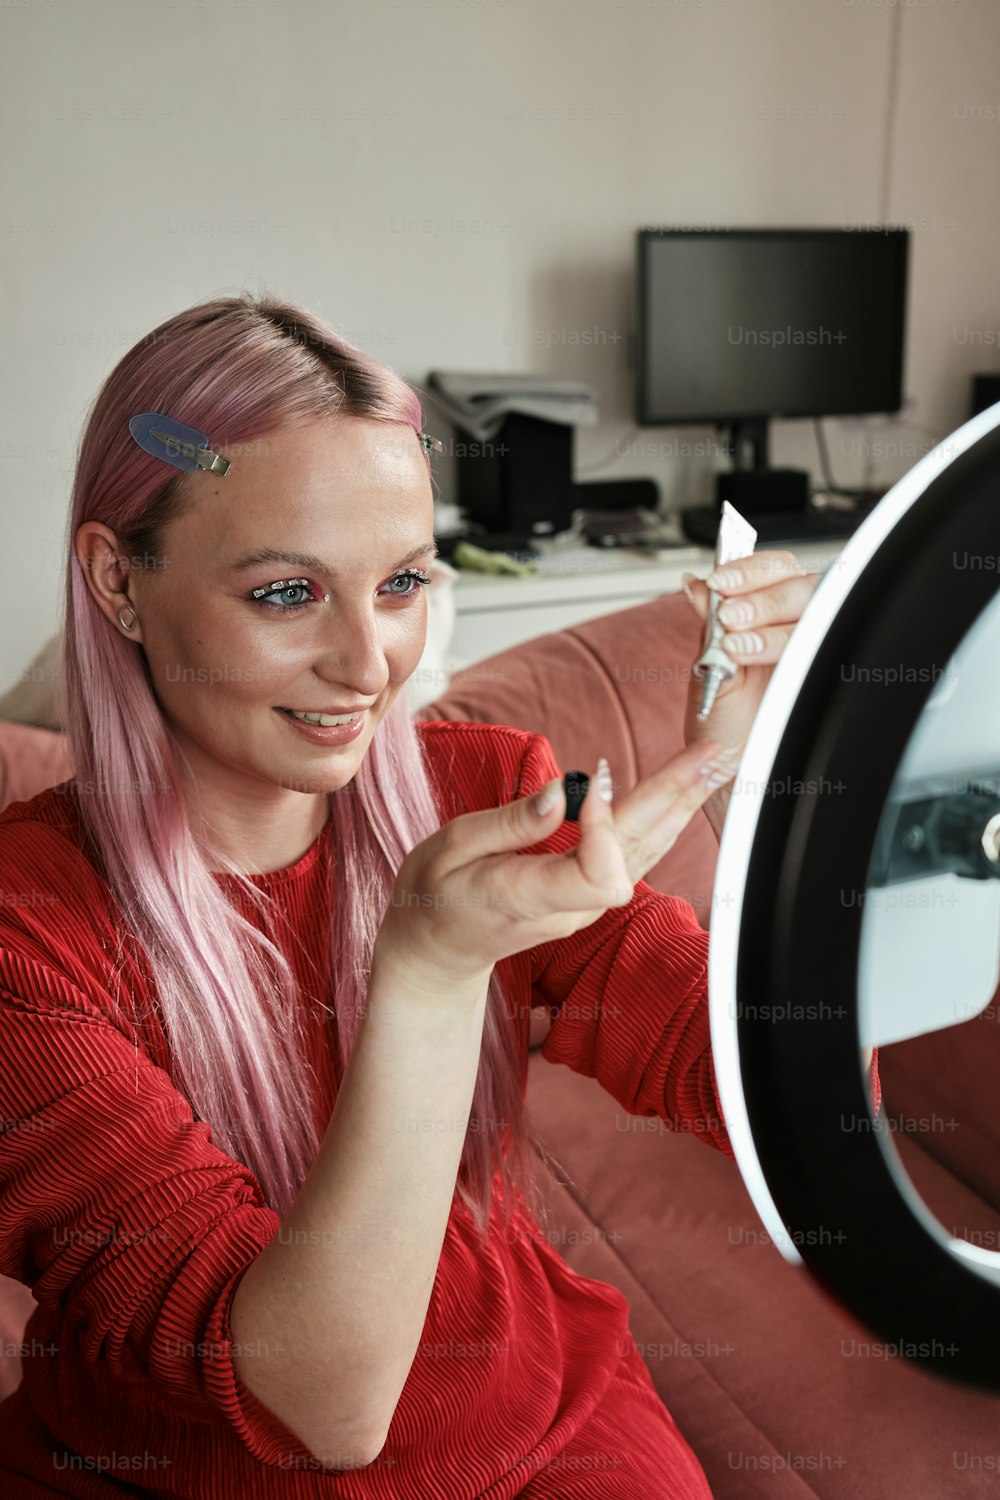 a woman with pink hair is holding a mirror